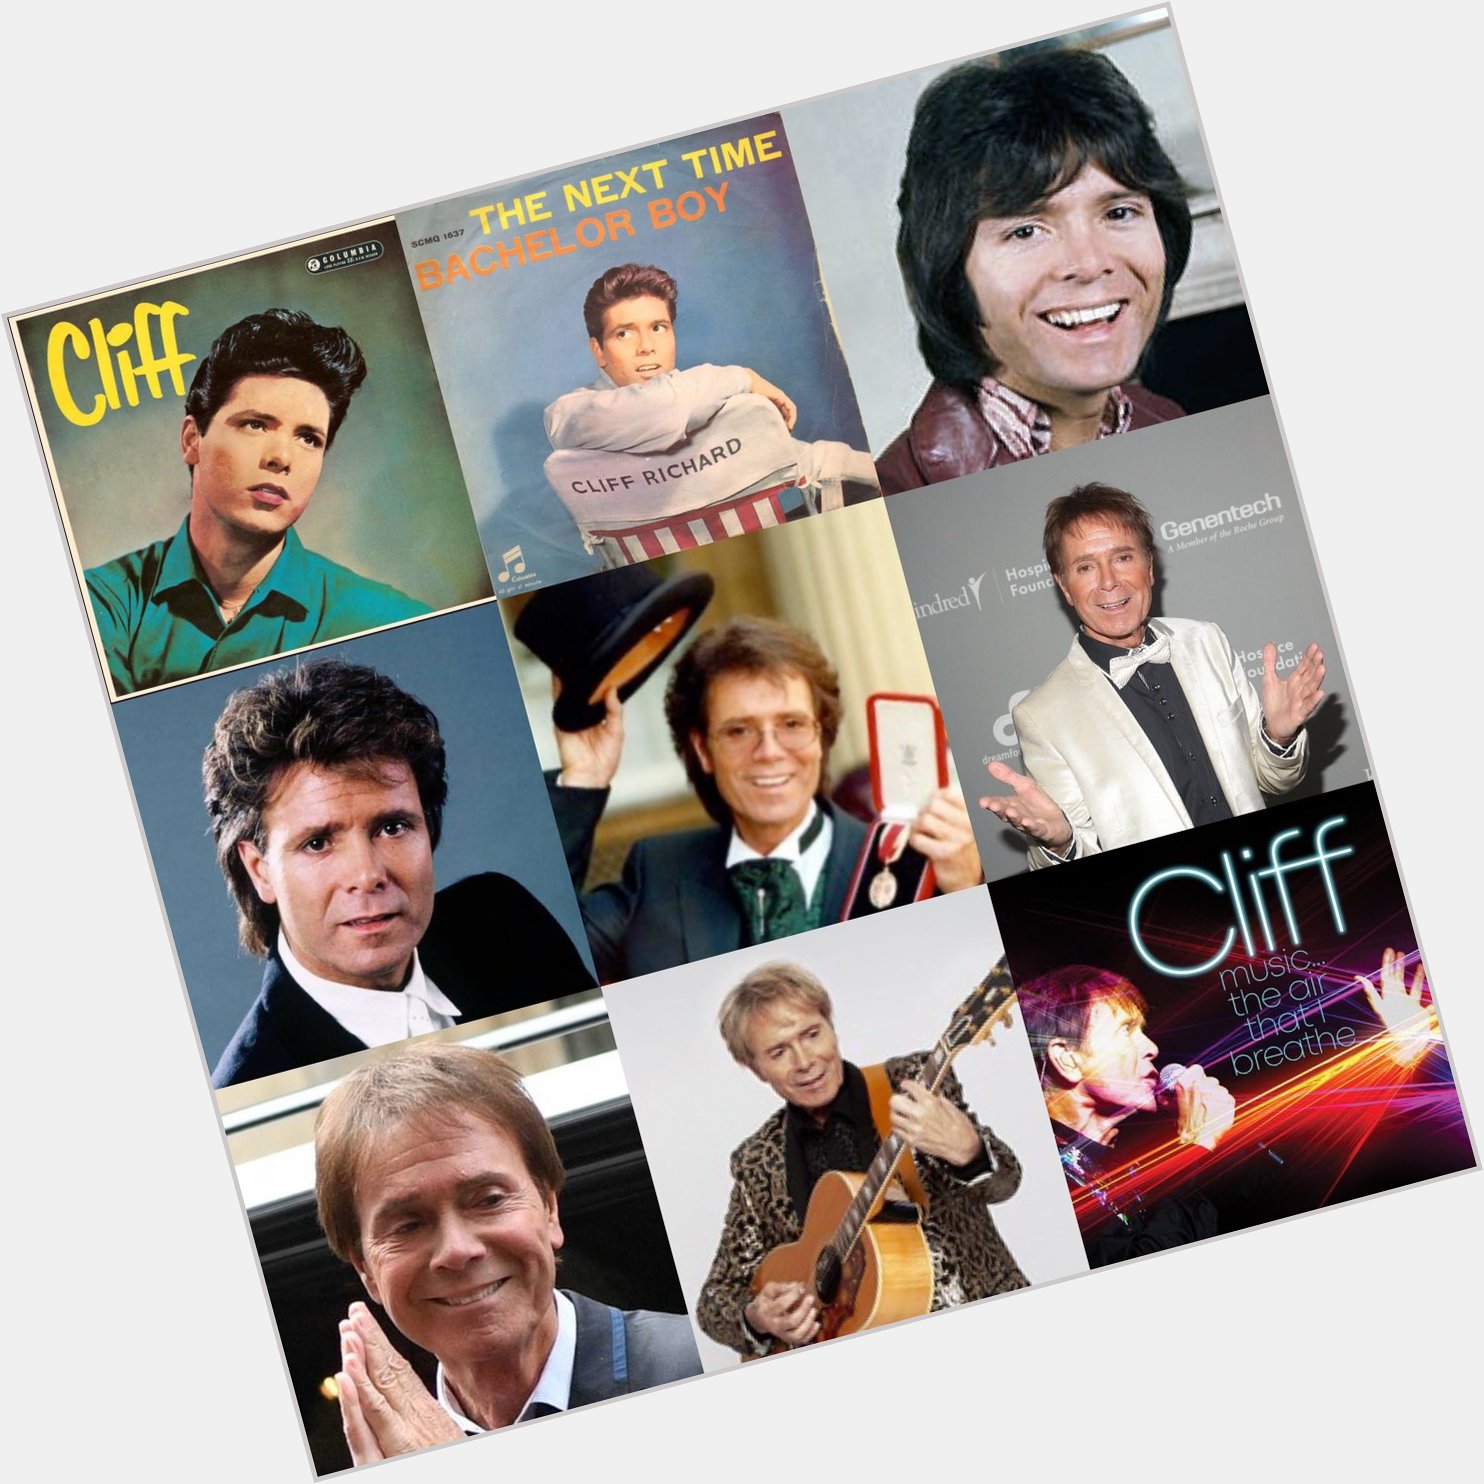 Happy 80th birthday and congratulations to Sir Cliff Richard! 